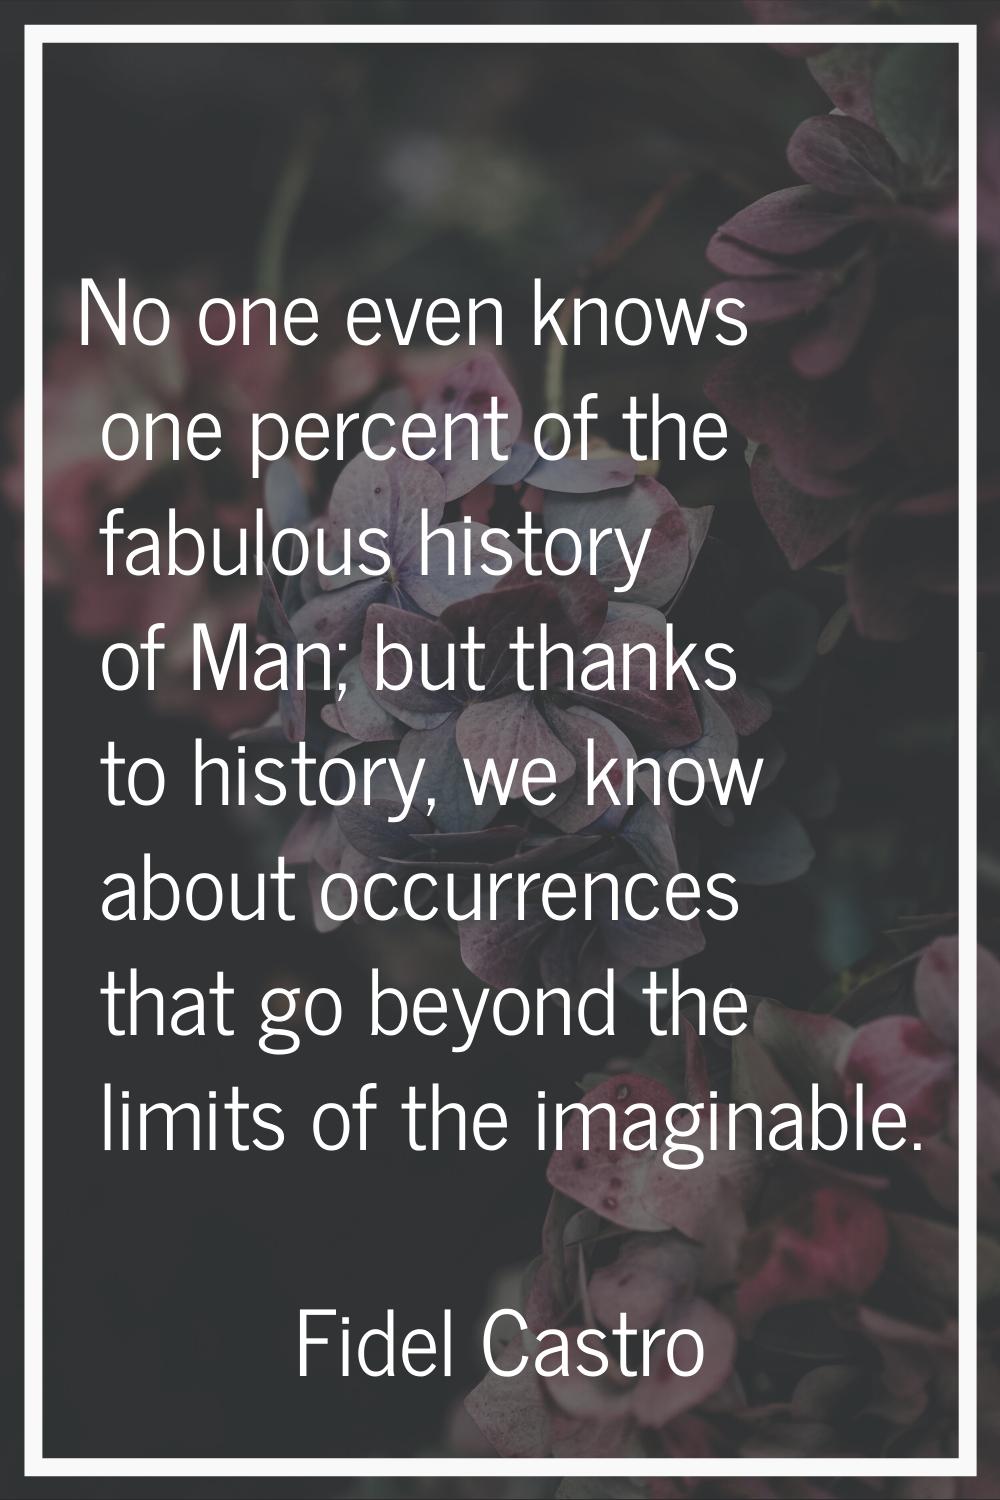 No one even knows one percent of the fabulous history of Man; but thanks to history, we know about 